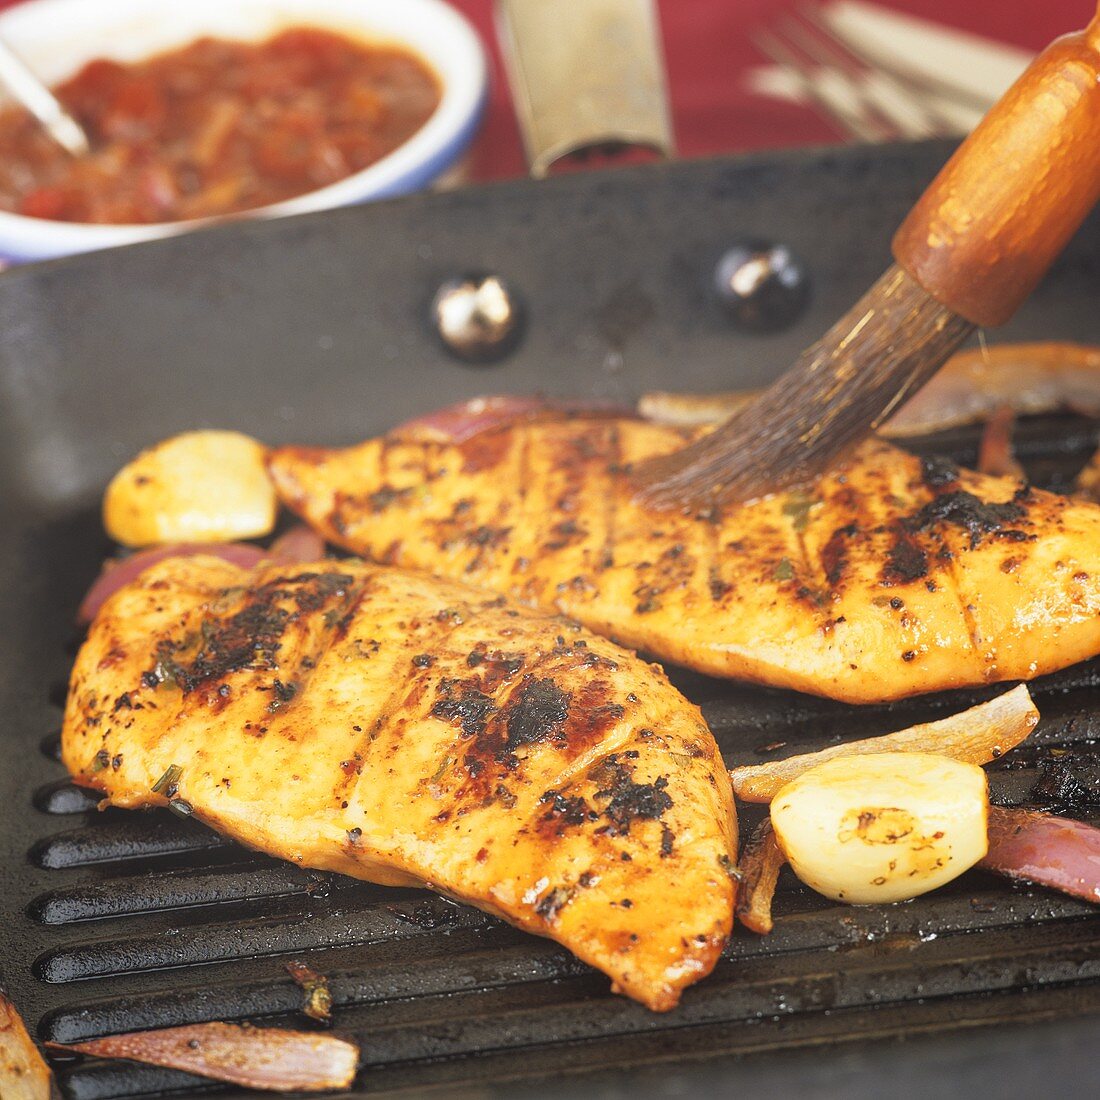 Brushing chicken breasts in a grill frying pan with marinade